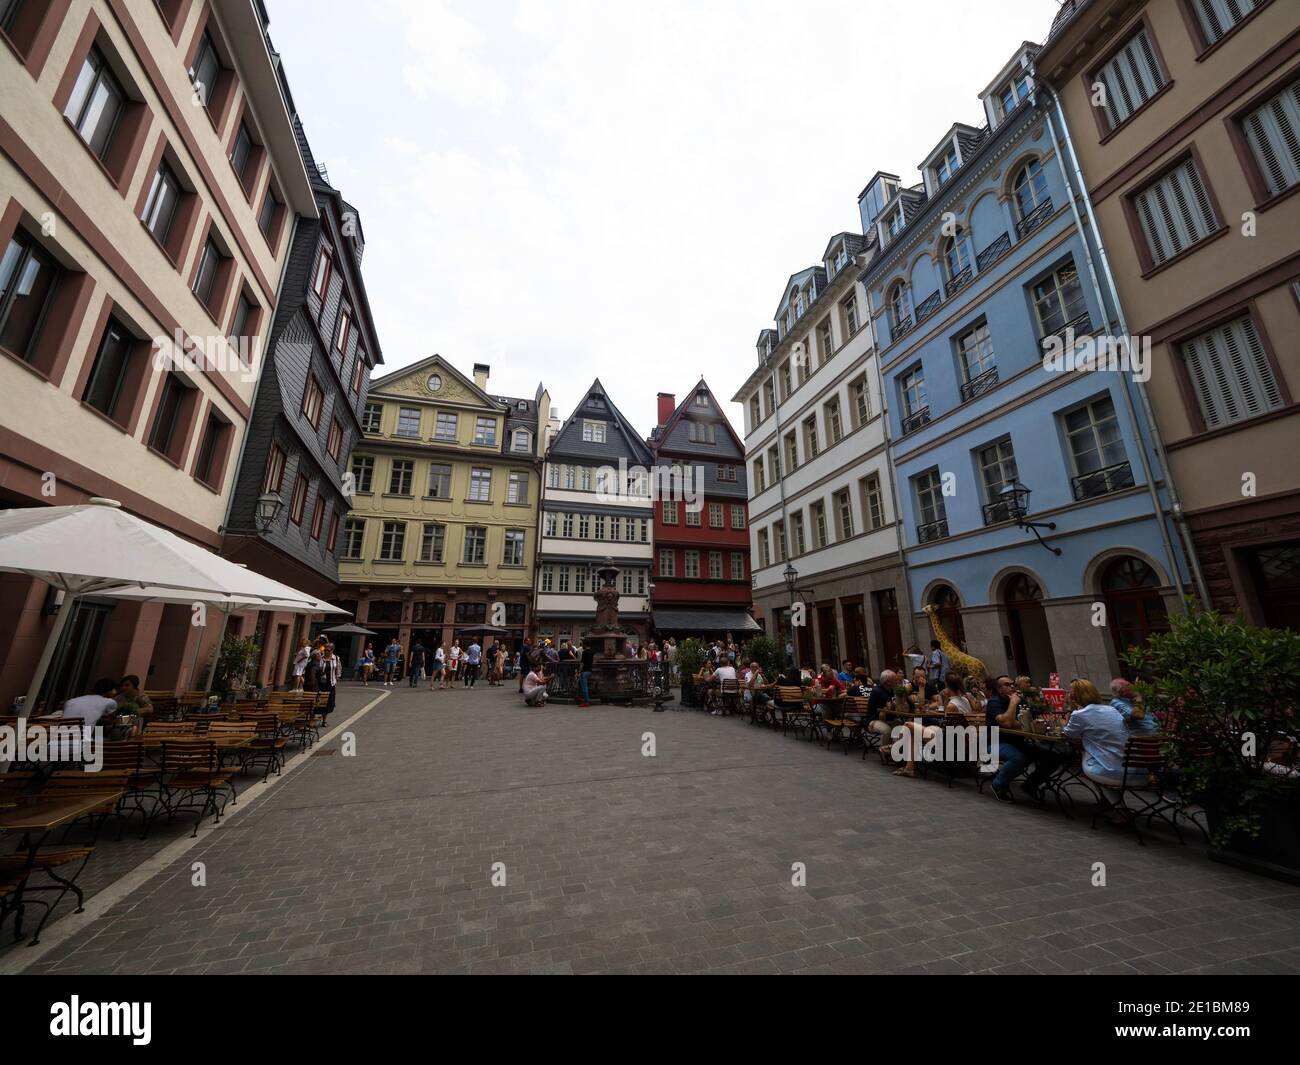 Panorama of Huehnermarkt Huhnermarkt chicken market square historic facade buildings old town centre of Frankfurt am Main Hesse Germany Europe Stock Photo